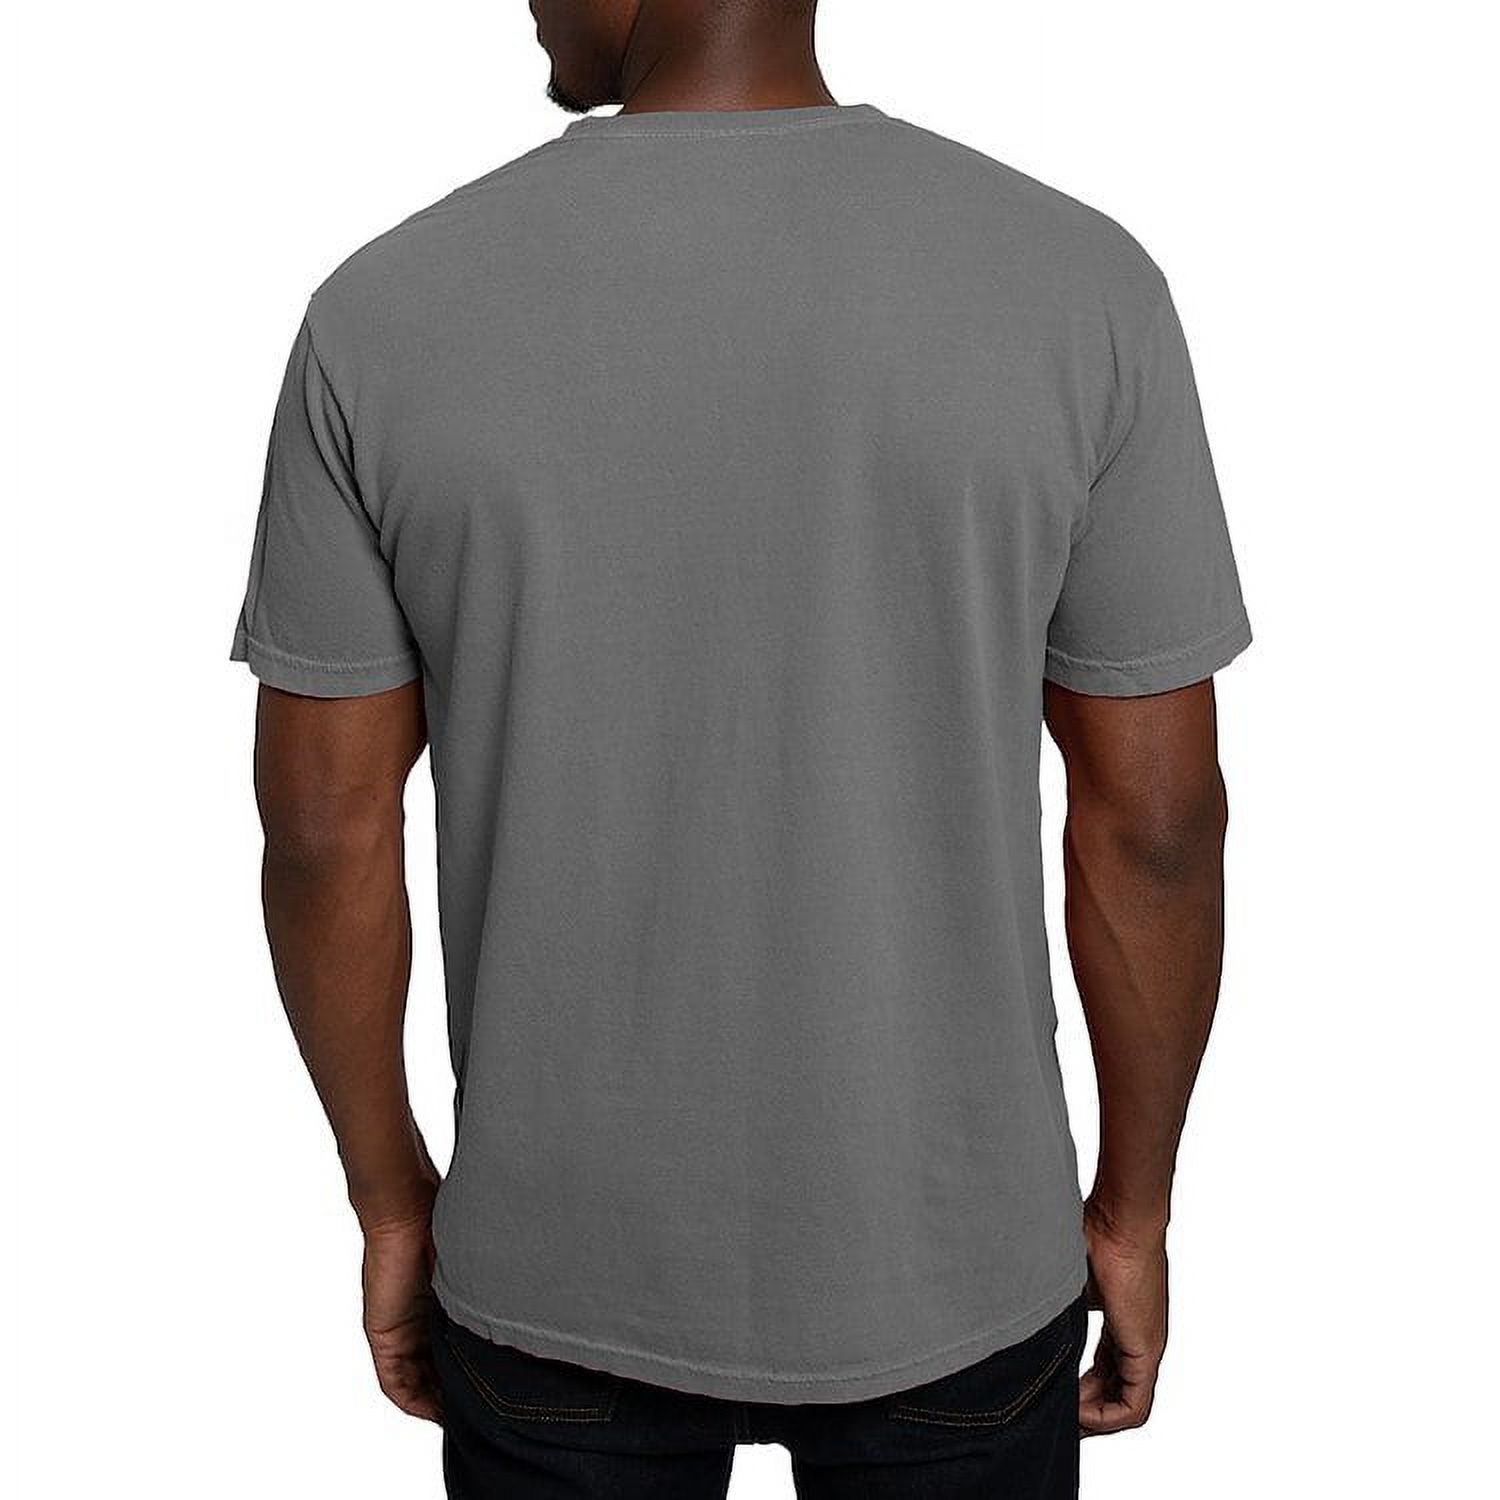 CafePress - There Are Two Kinds Of People In This Worl T Shirt - Mens Comfort Colors Shirt - image 2 of 5